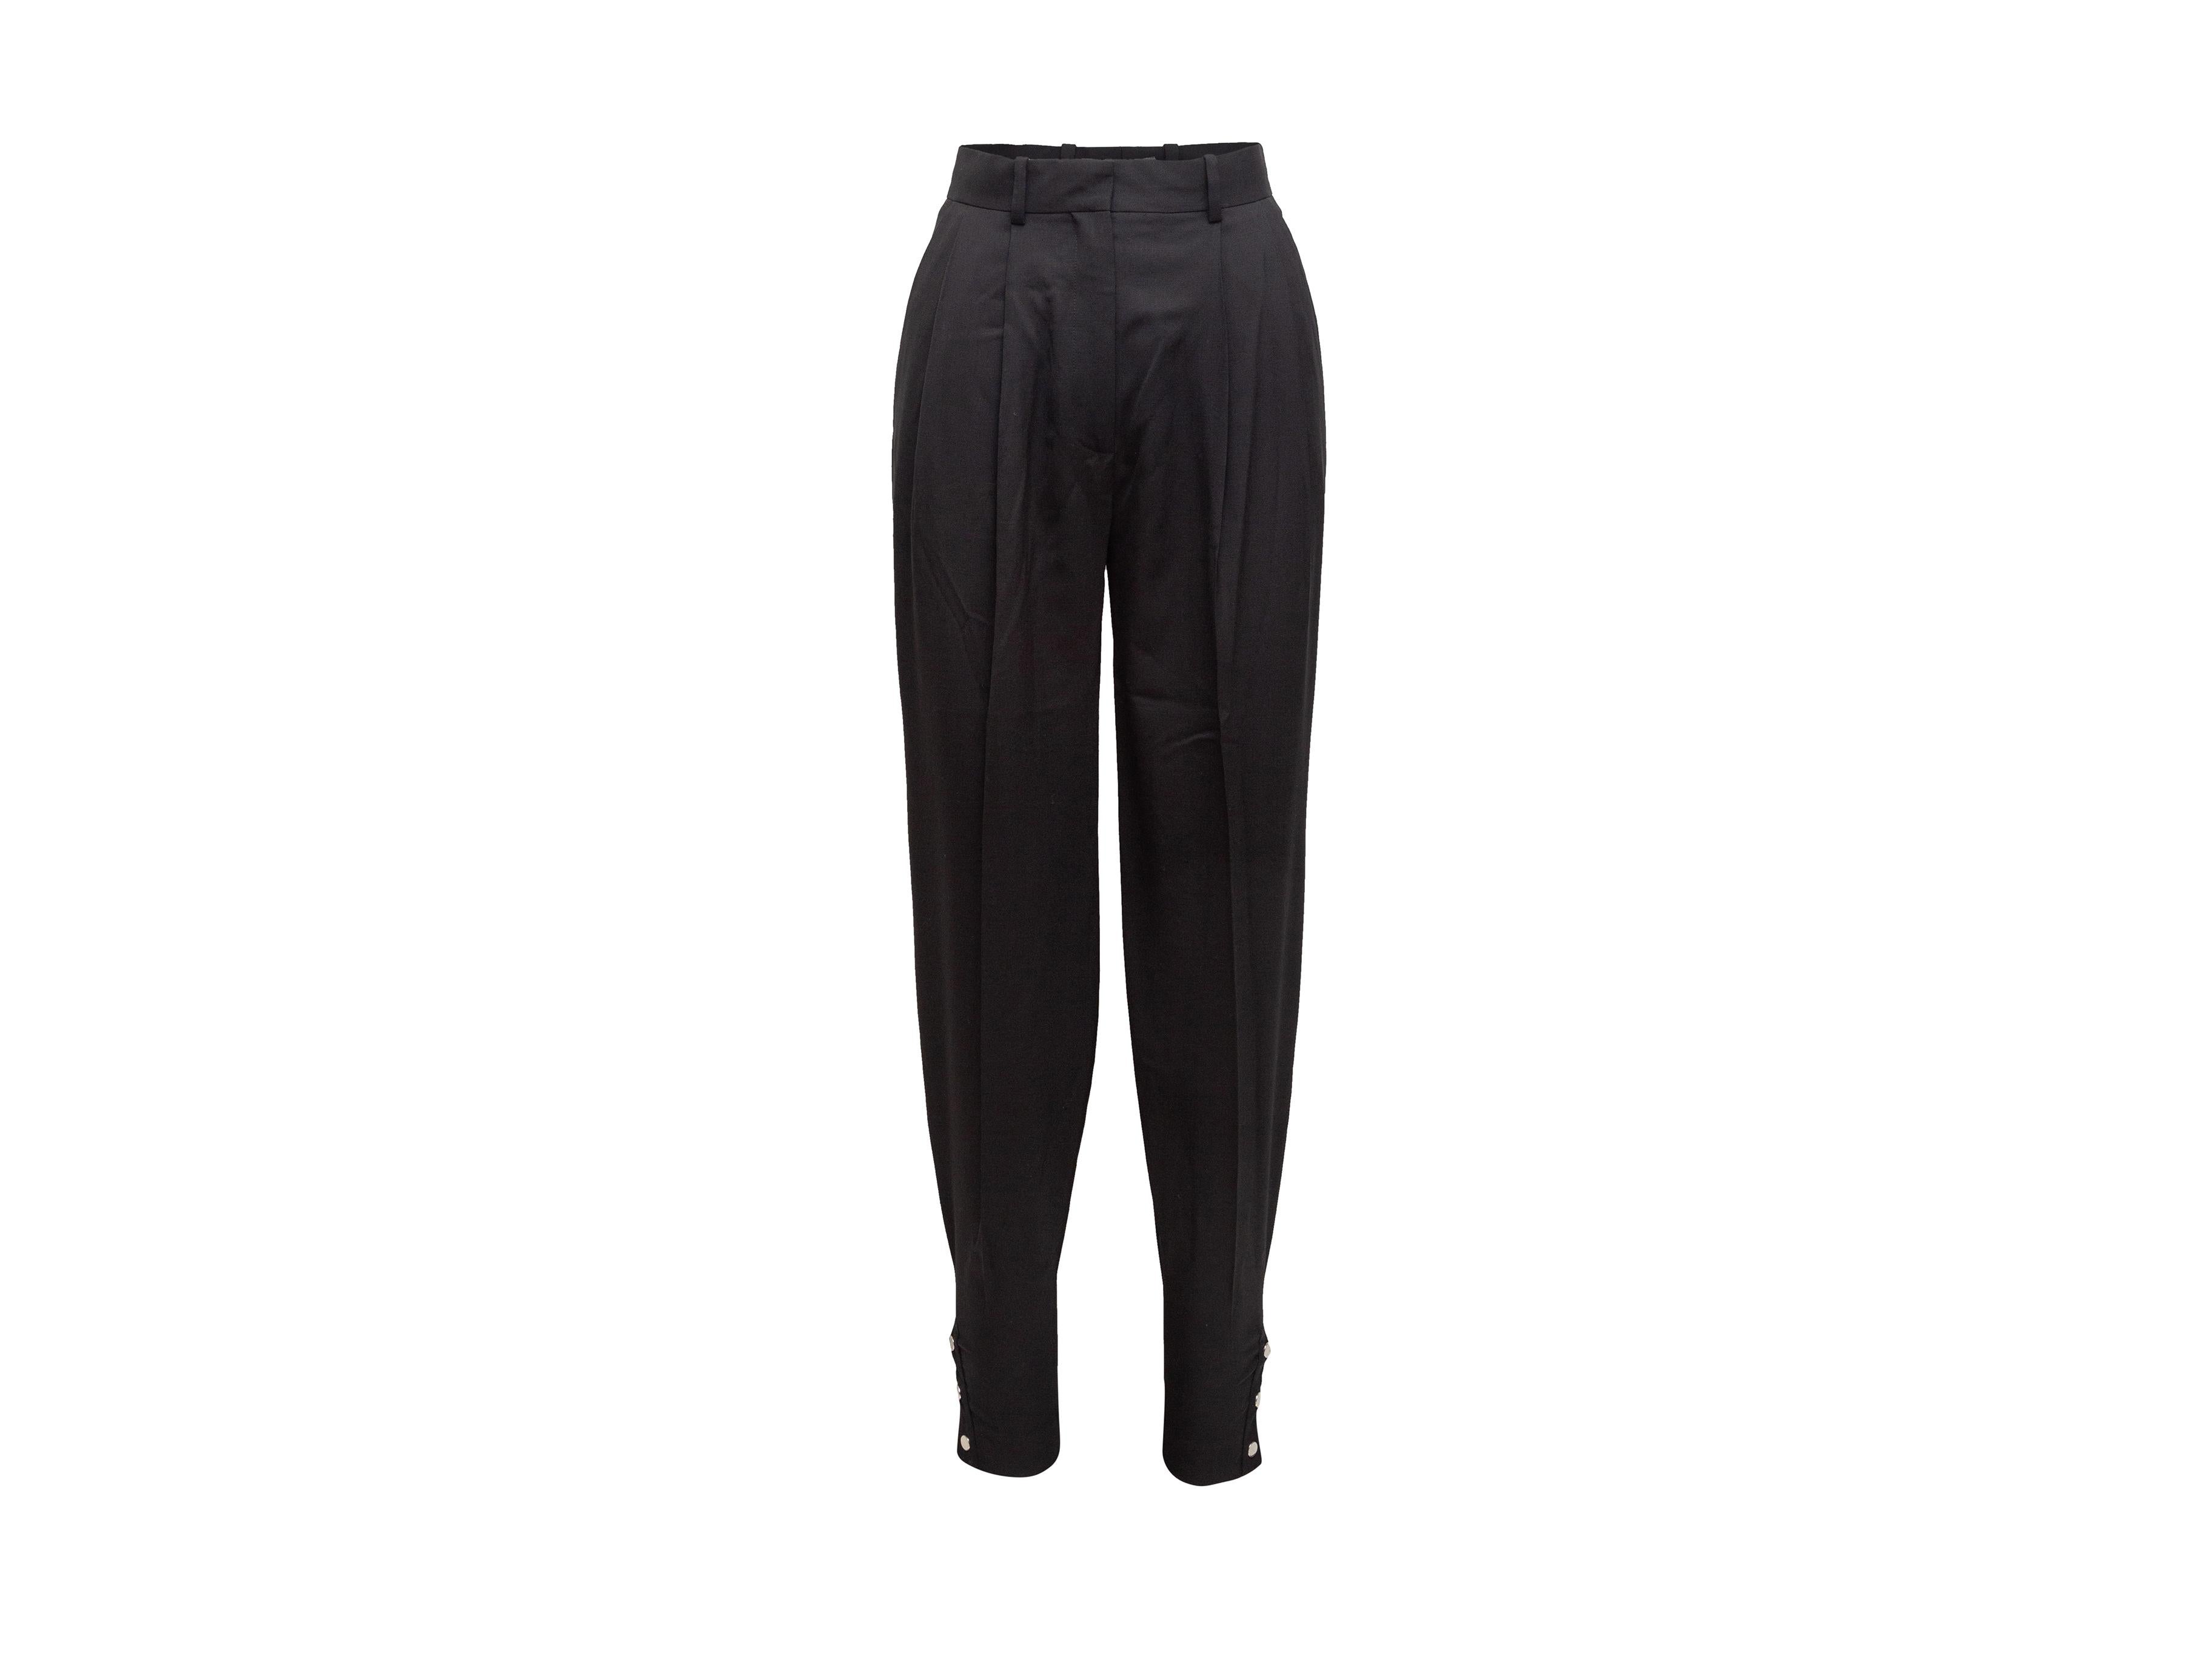 Product details: Black wool pleated tapered trousers by Altuzurra. Four pockets. Buttons at leg openings. Zip and hook-and-eye closures. Designer size 34. 26